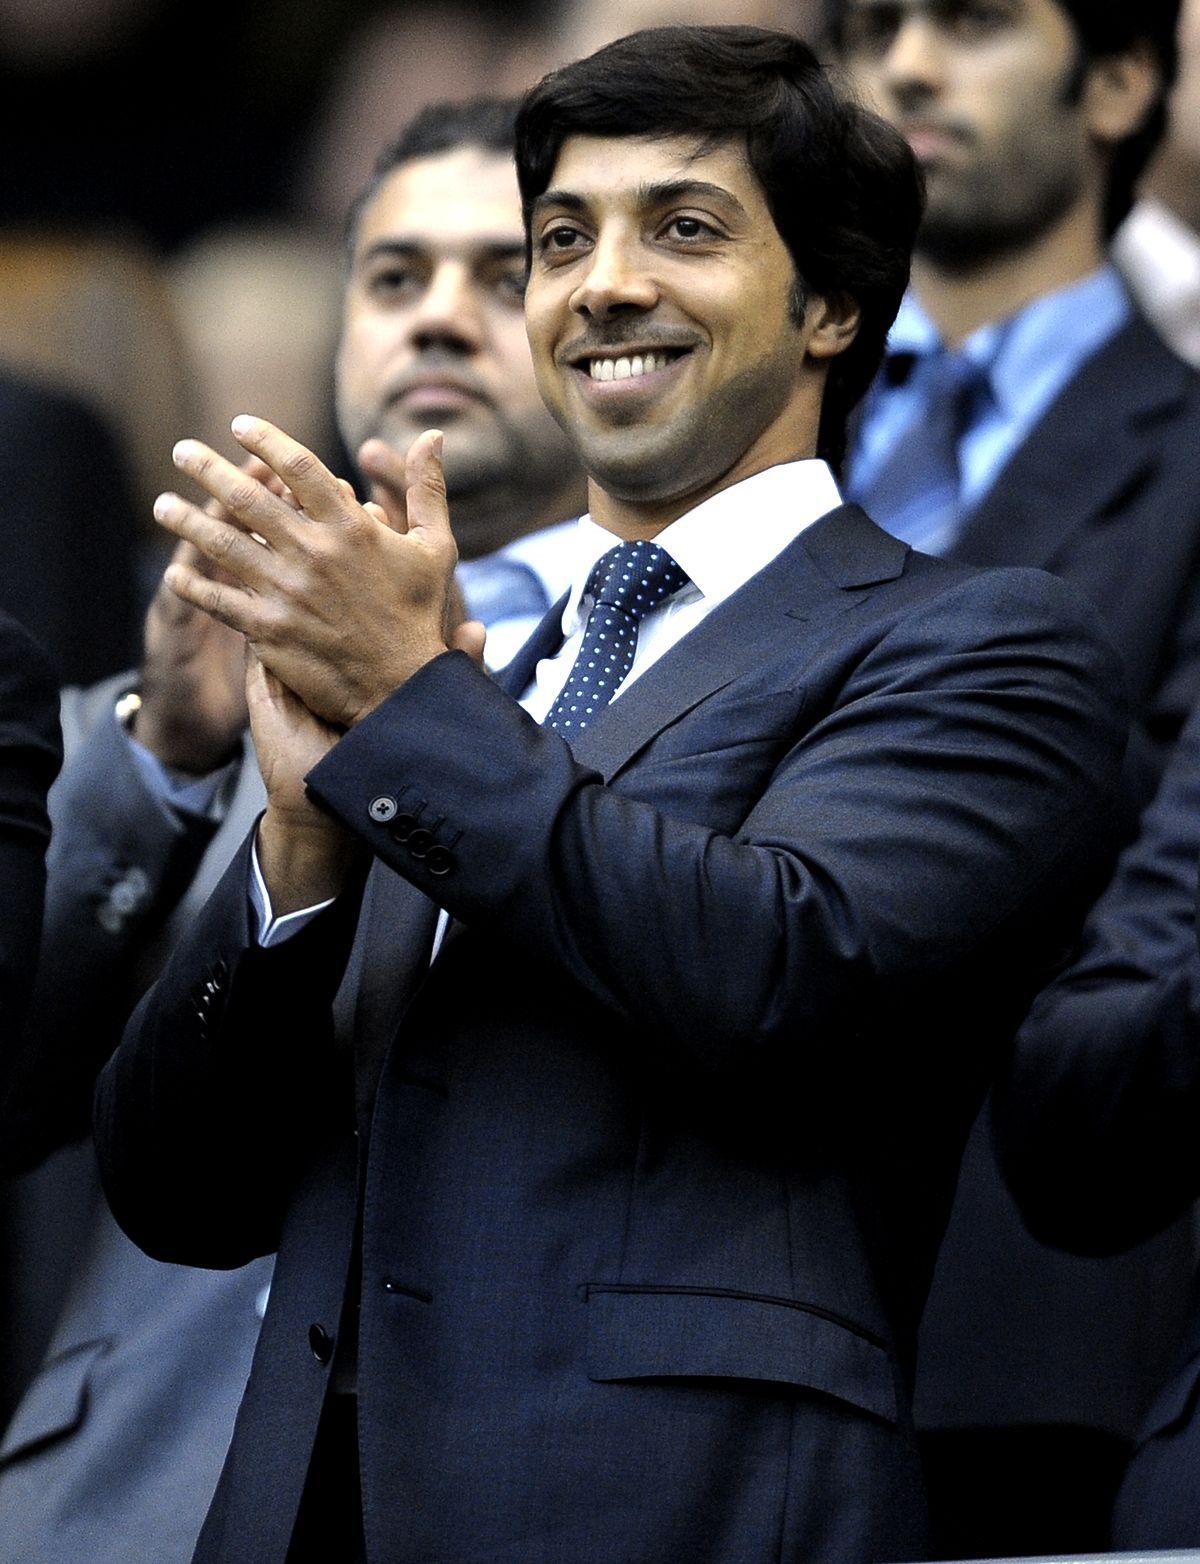 Sheikh Mansour Awarded For Leading Man City To Victory Arabian Business